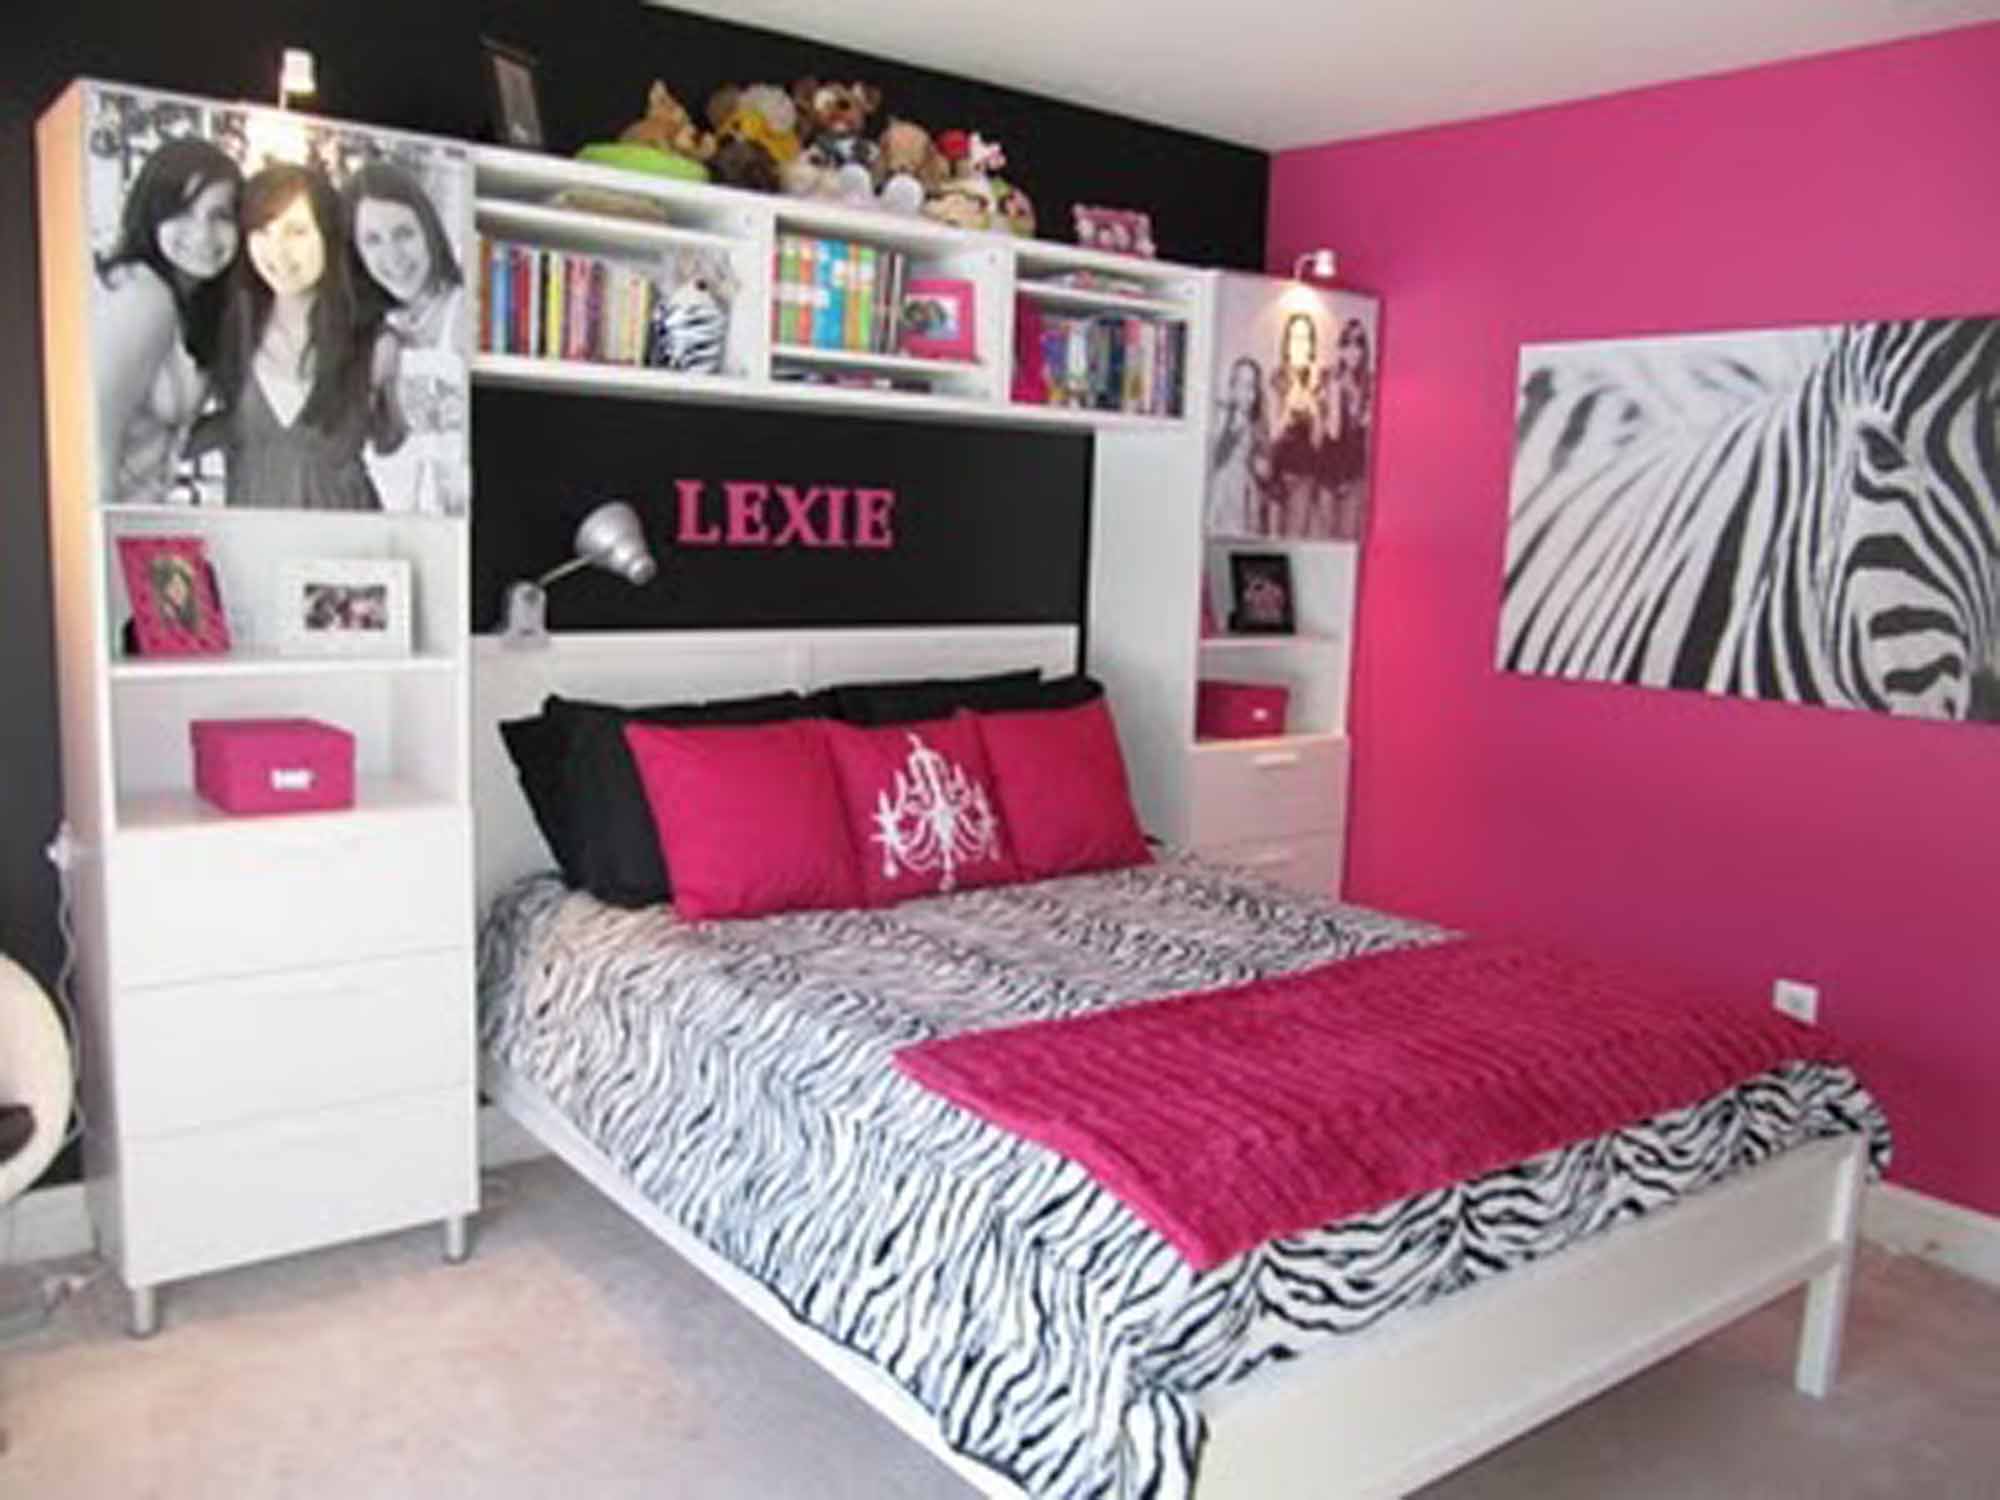 Chic cool bed rooms | Modern Teenage Bedrooms Ideas For Girls | Home Design cool bedroom ideas for teenage girl